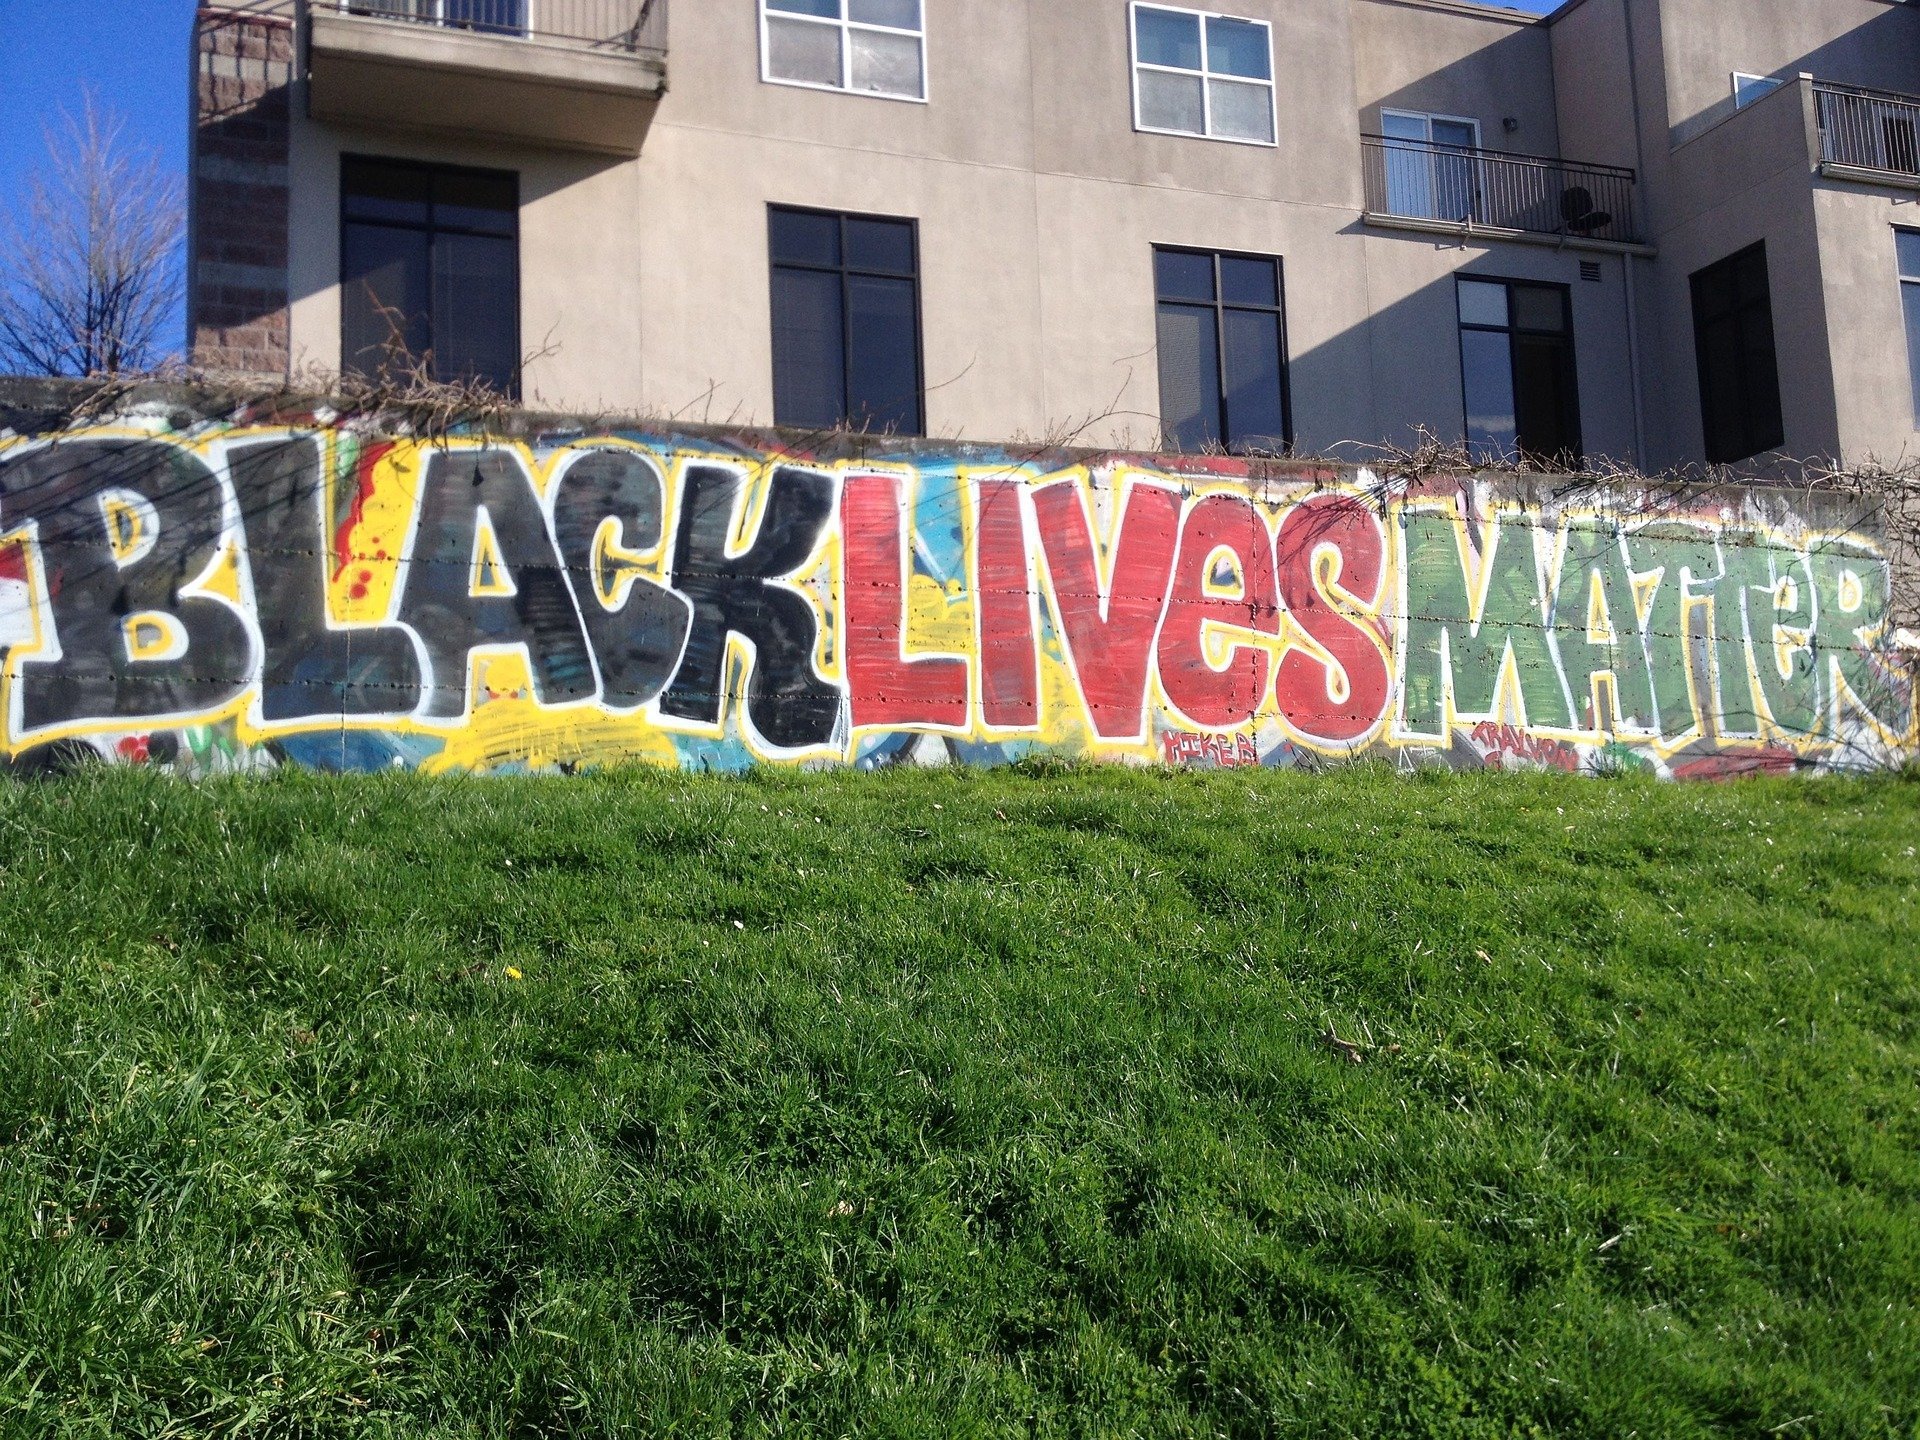 A "Black Lives Matter" mural at a boundary wall | Source: Getty Images